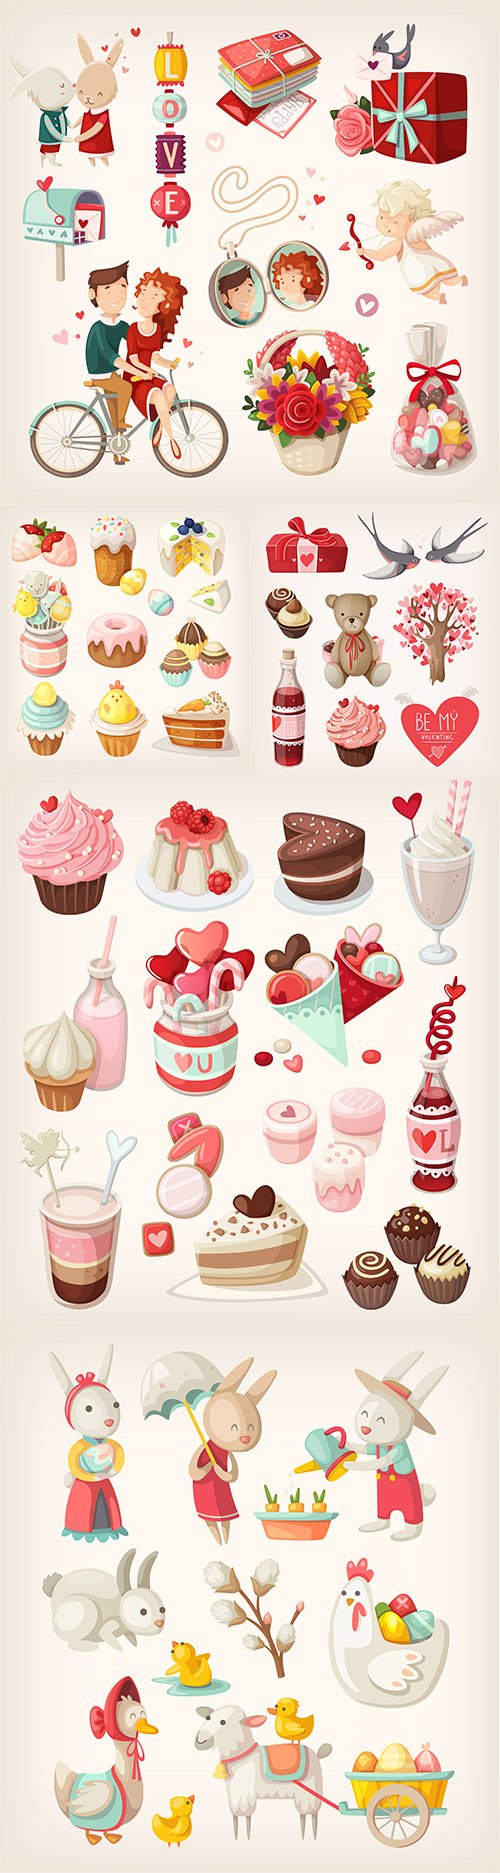 Easter characters and romantic objects colection icons